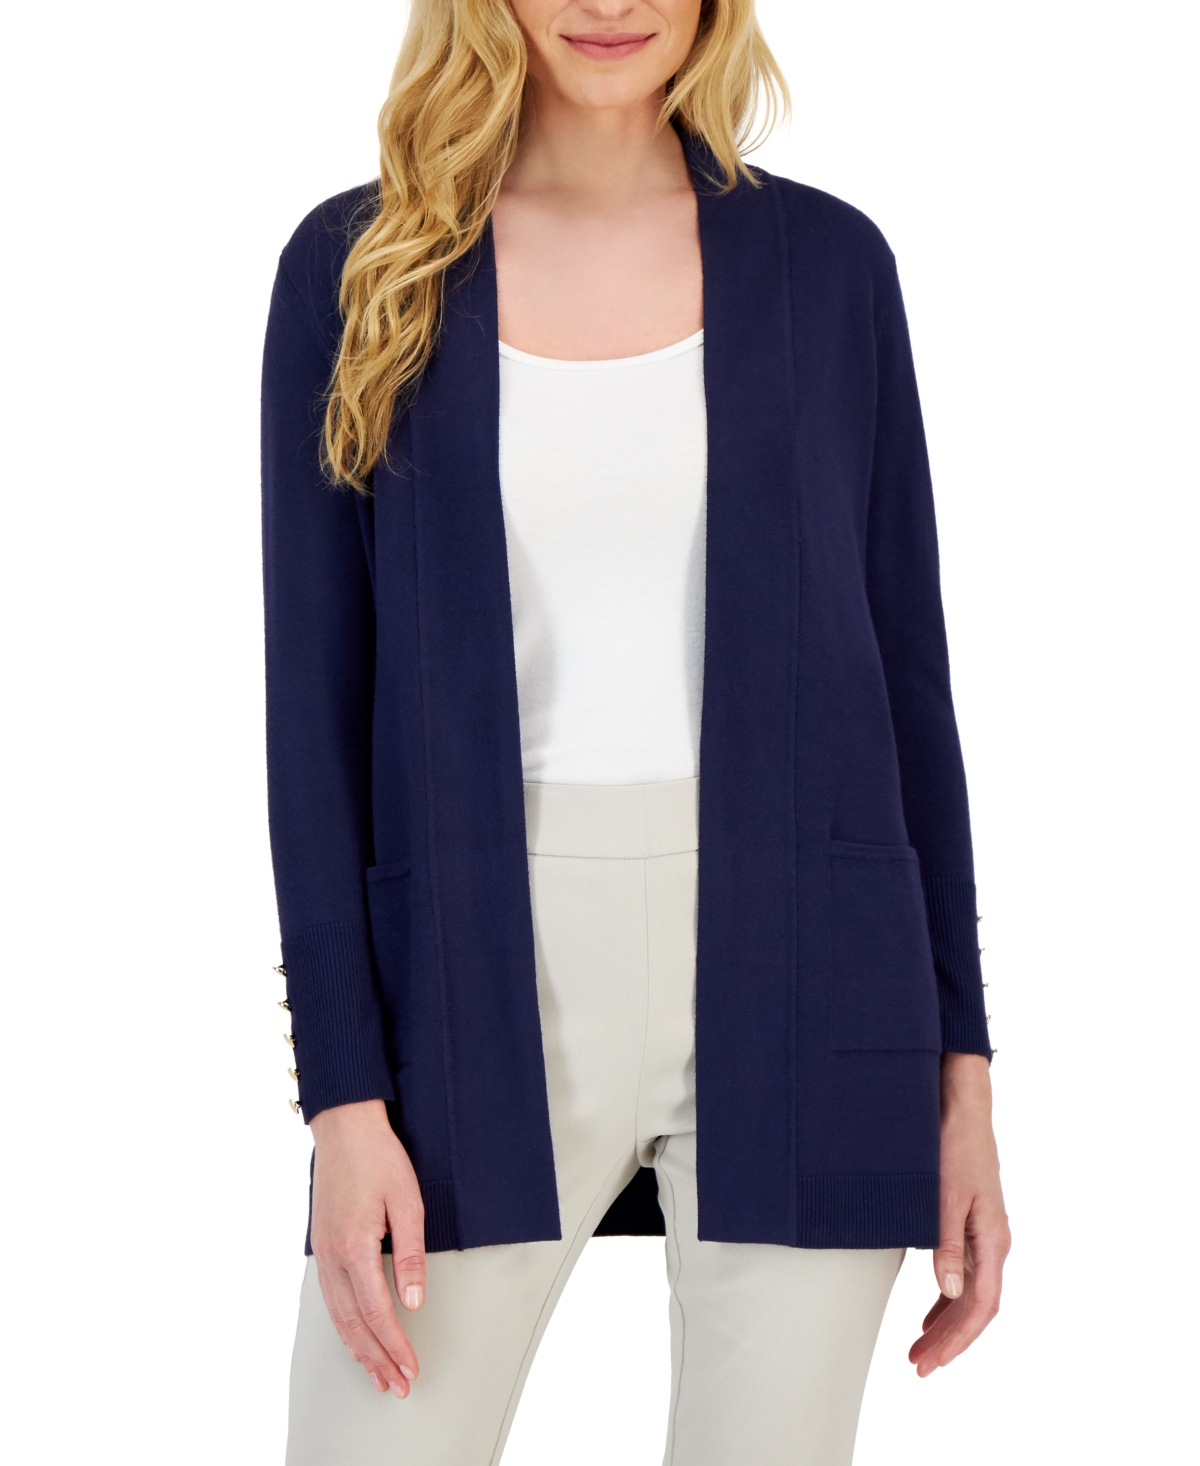 JM COLLECTION PETITE OPEN-FRONT CARDIGAN, CREATED FOR MACY'S